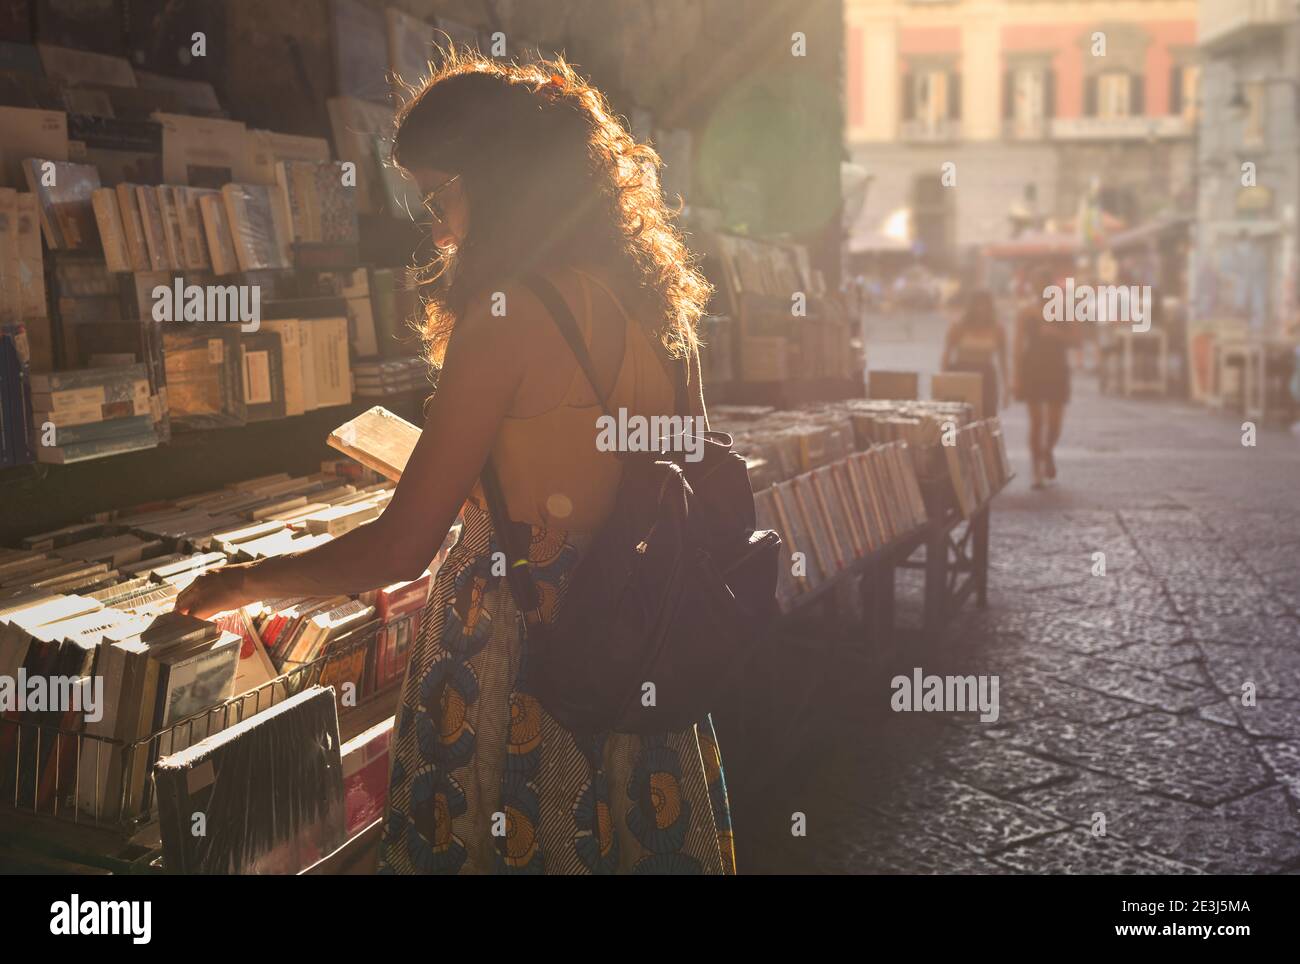 A young woman dressed in summer clothes chooses a book while shopping in an open air market in Europe. Stock Photo